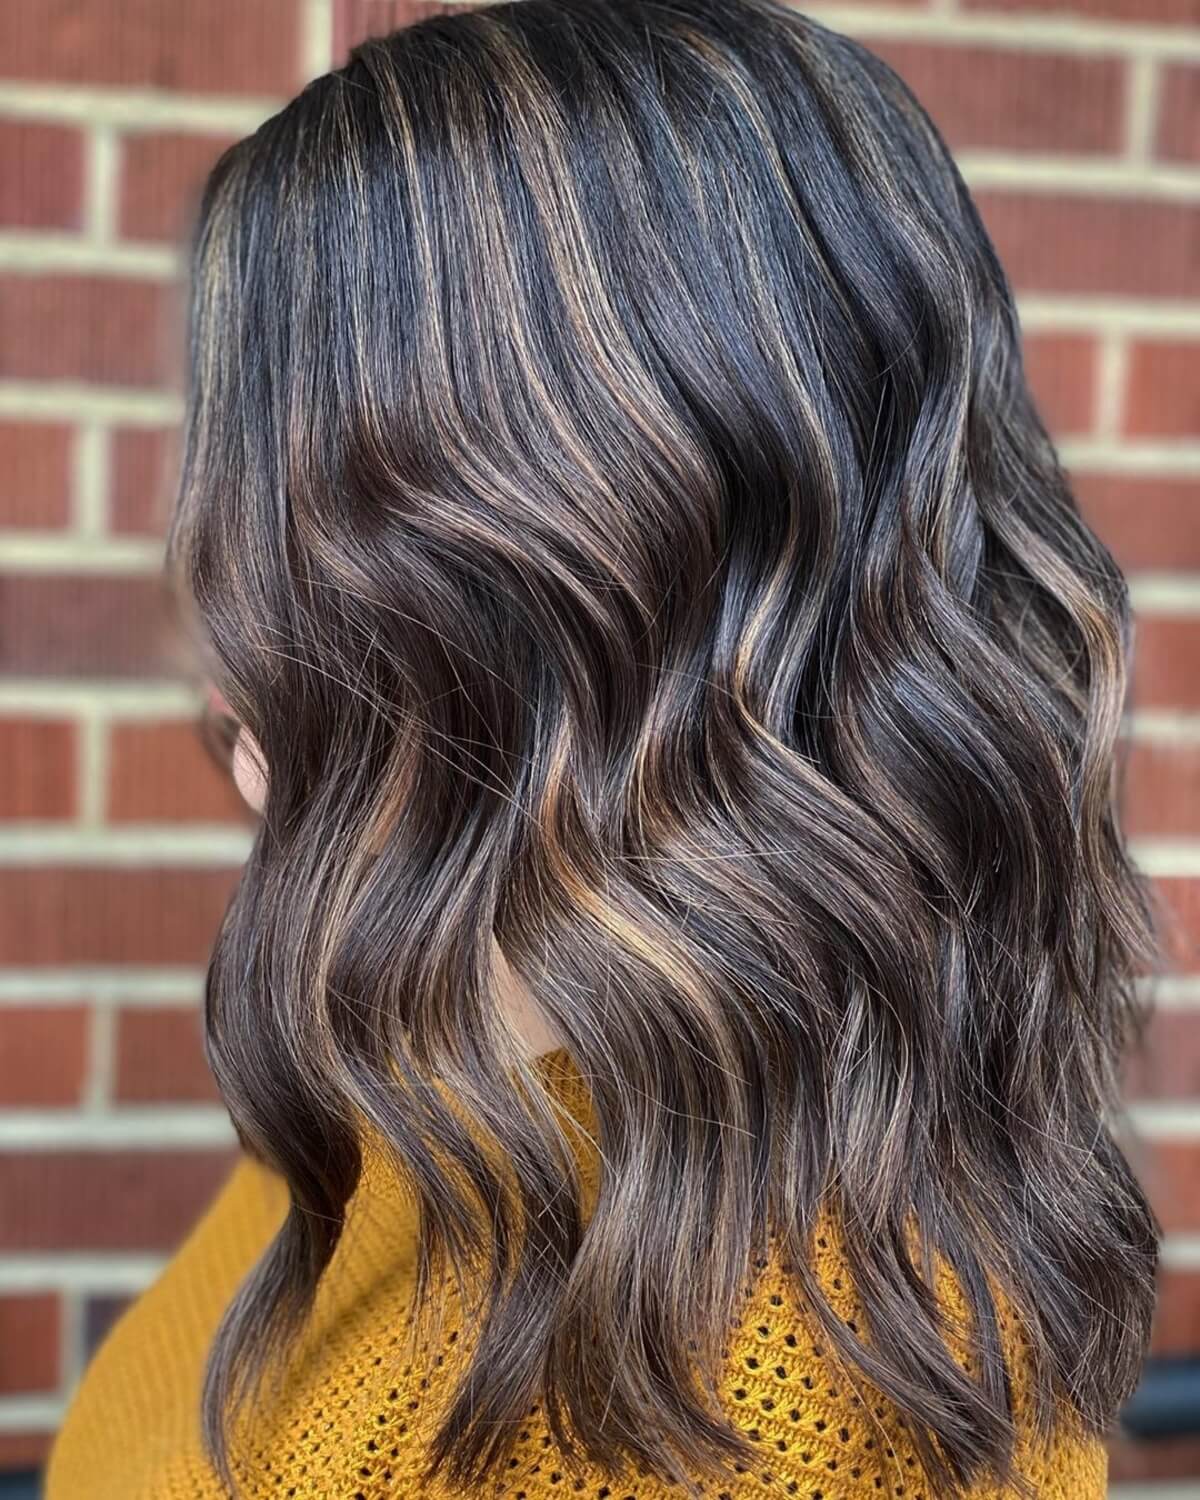 22 Trending Ways To Combine Dark Brown Hair with Caramel Highlights